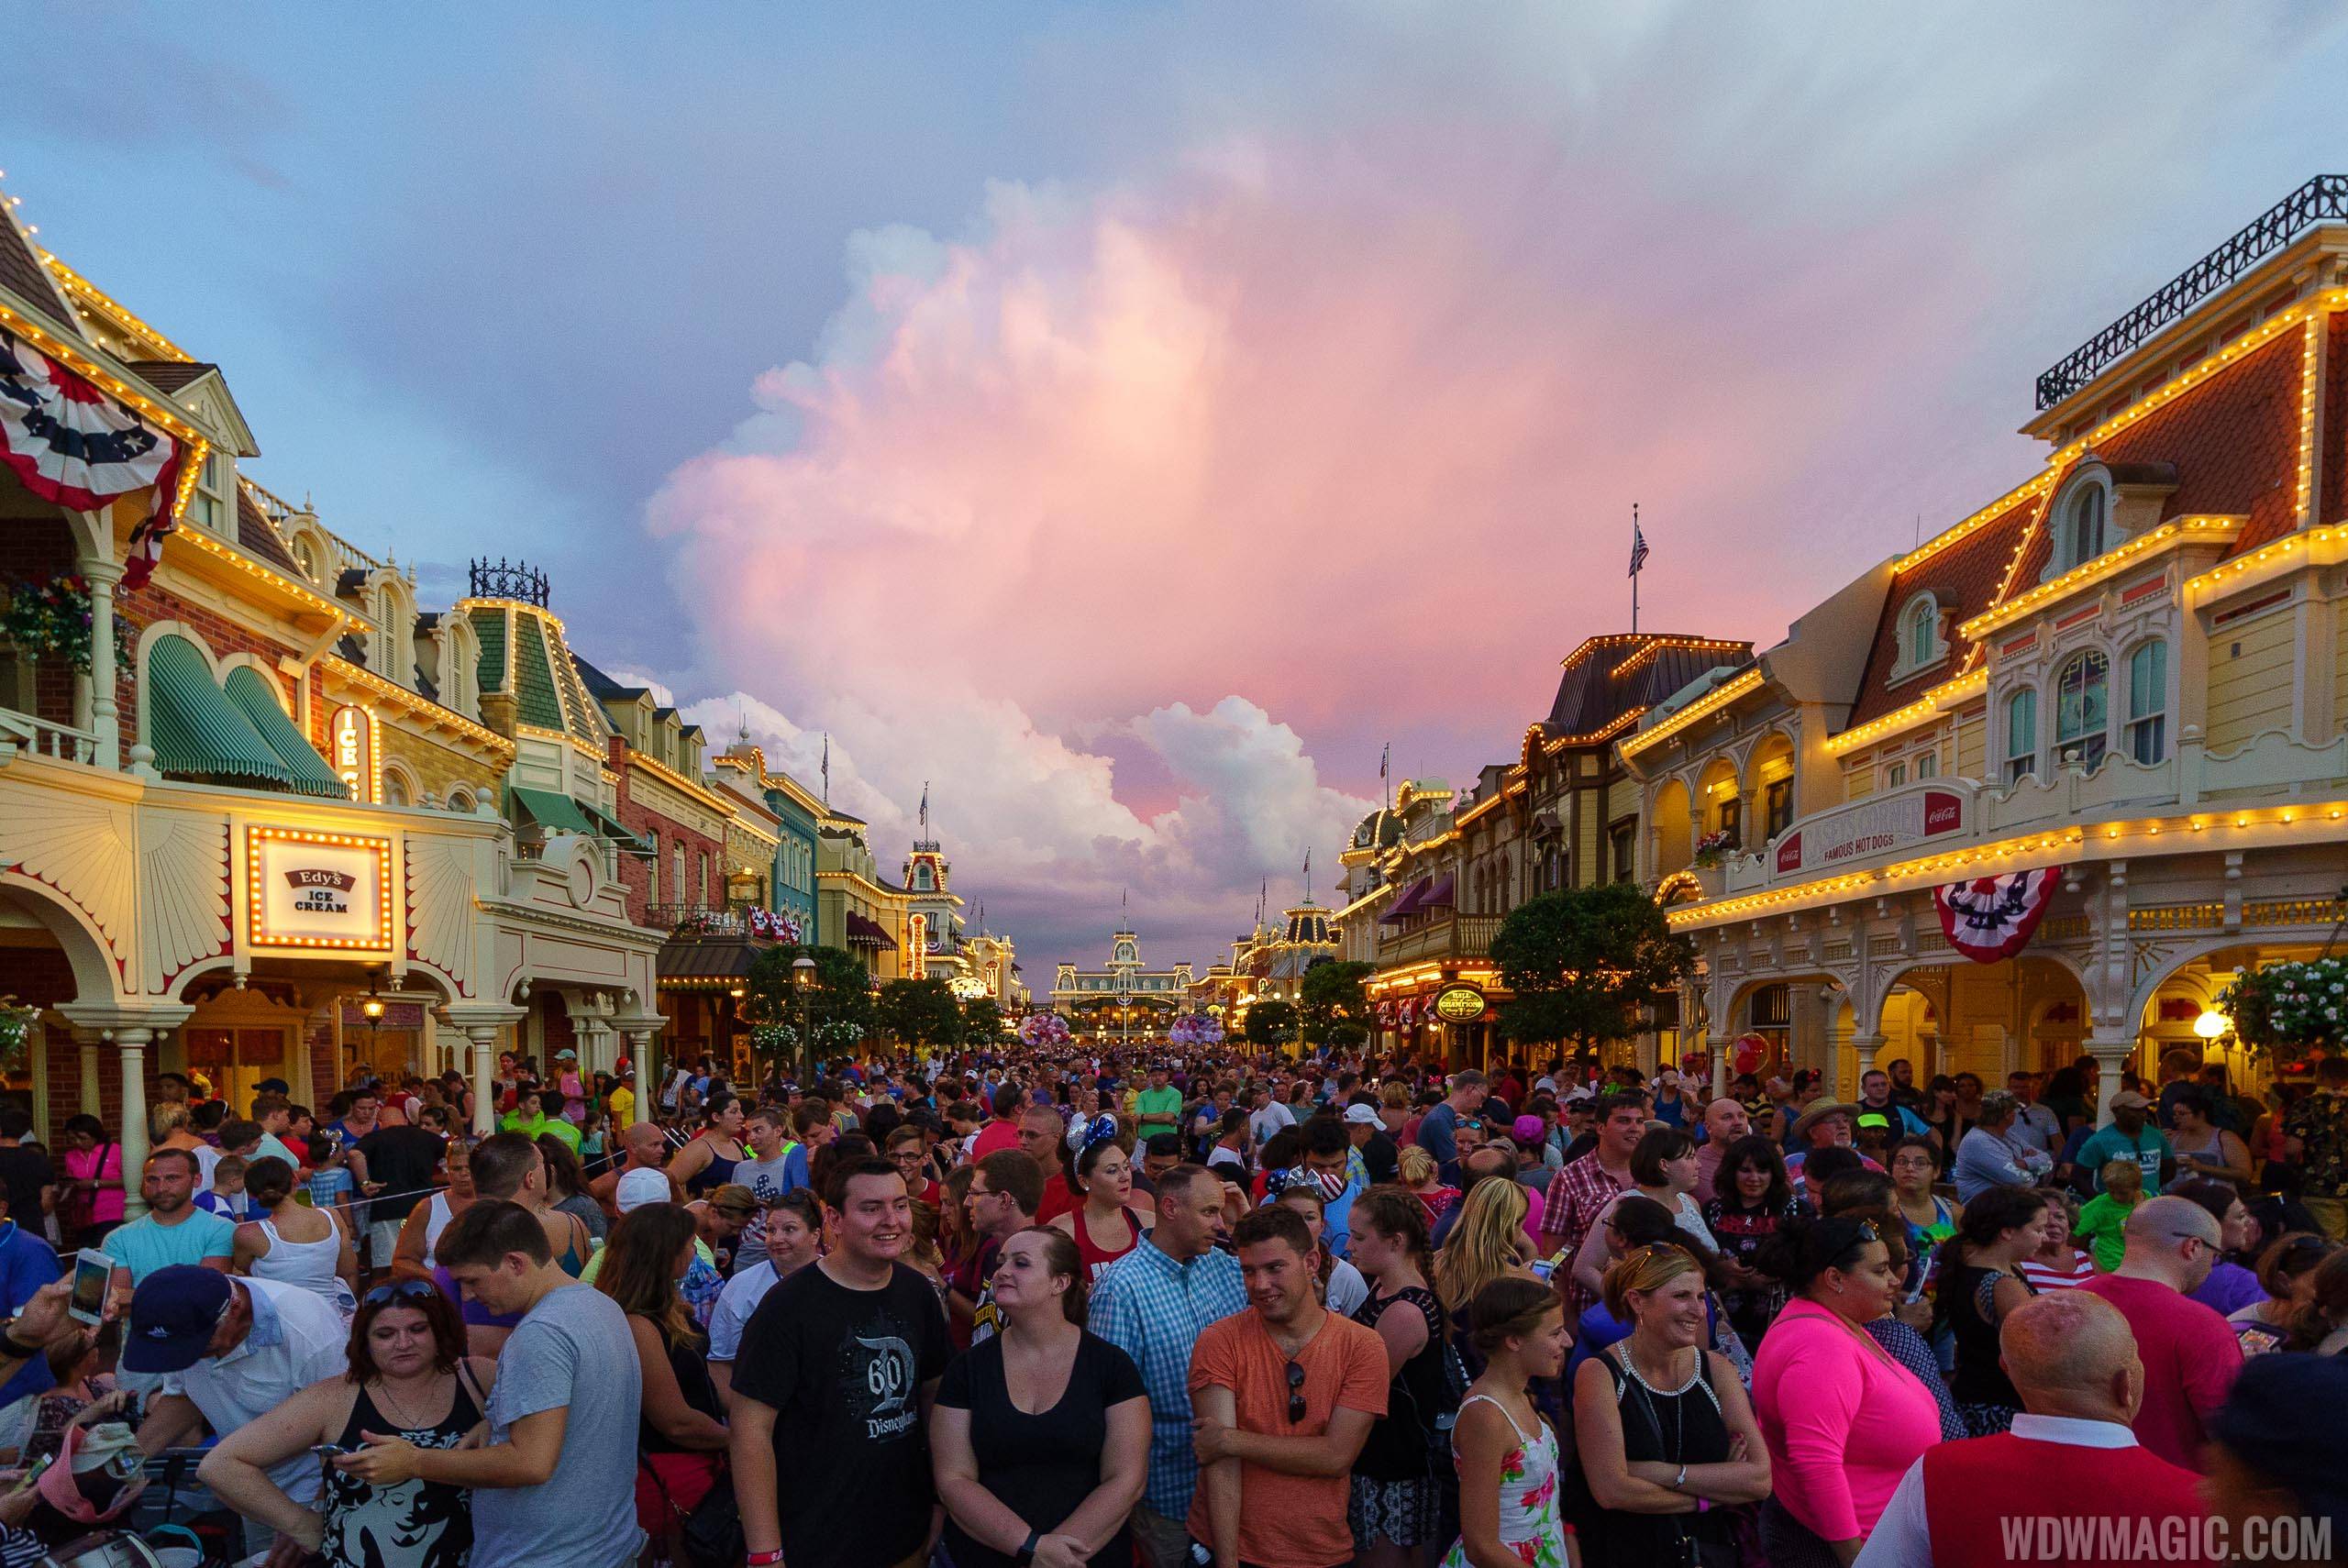 We likely won't see Magic Kingdom crowds as big as this from July 4 2018 due to capacity restrictions still in effect